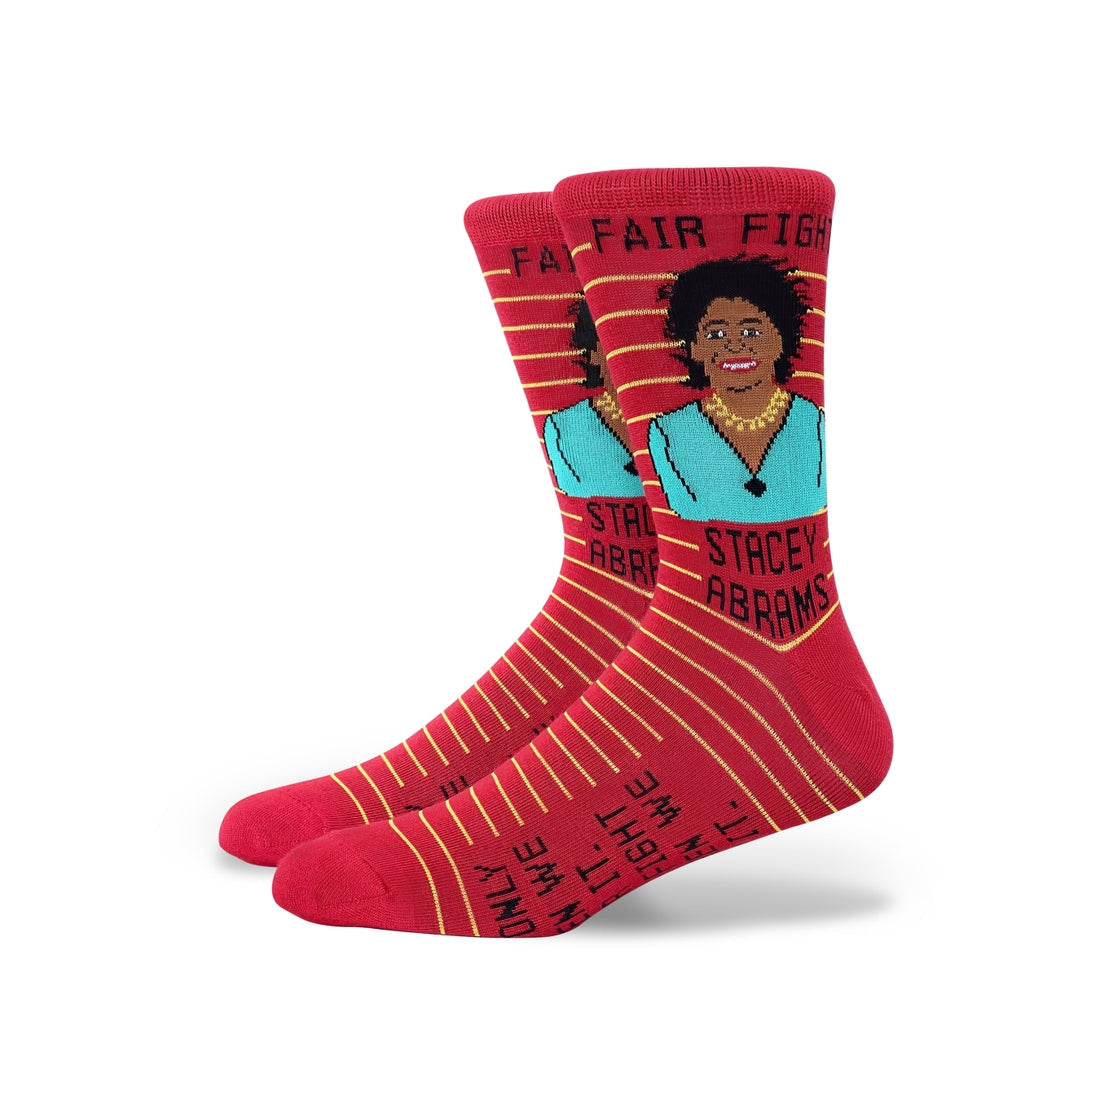 ZZNB_Women's Stacey Abrams Ankle